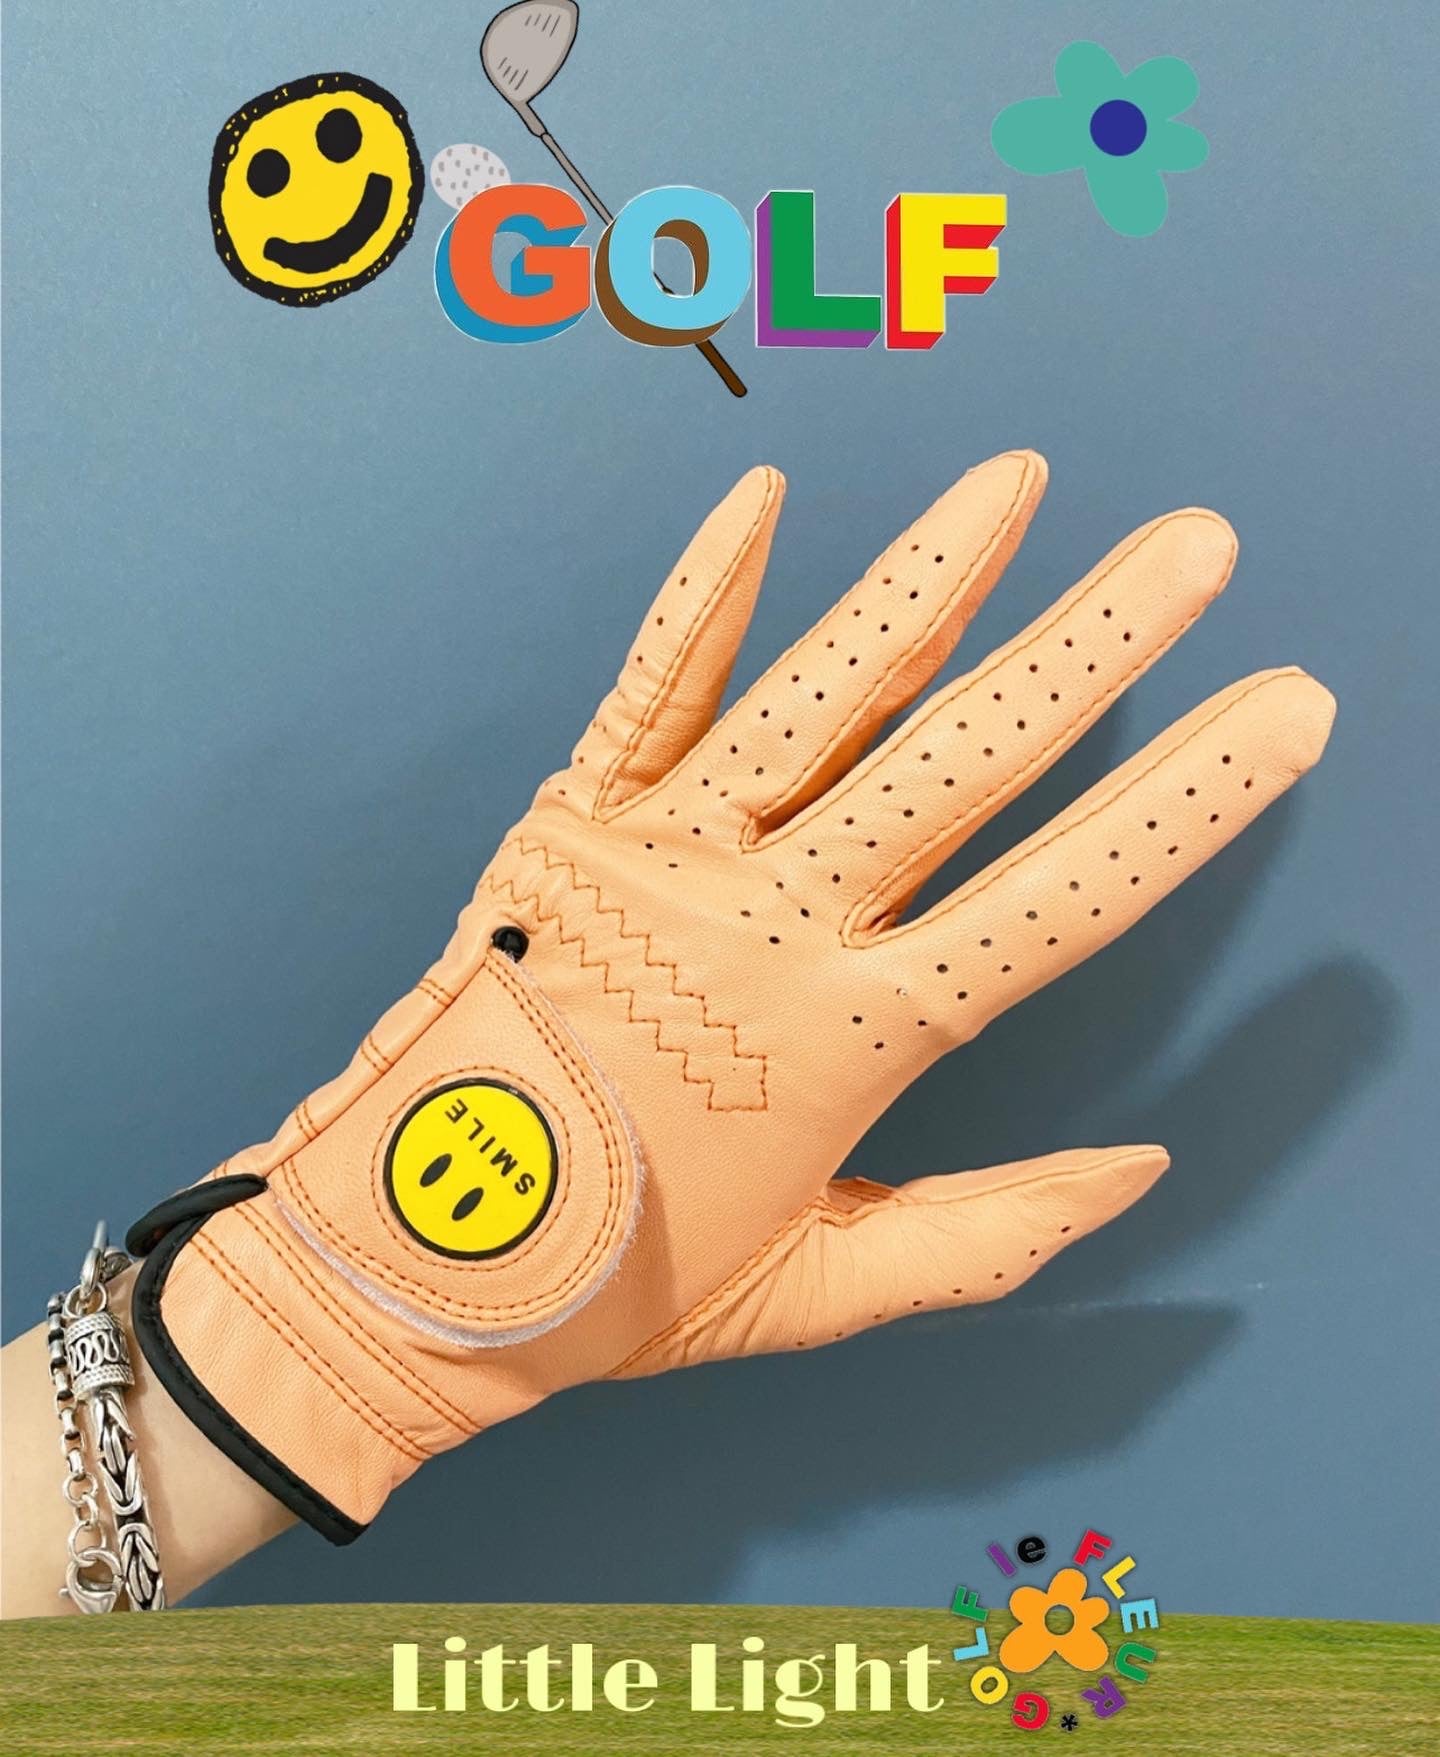 Smile patches Lamb leather golf left gloves